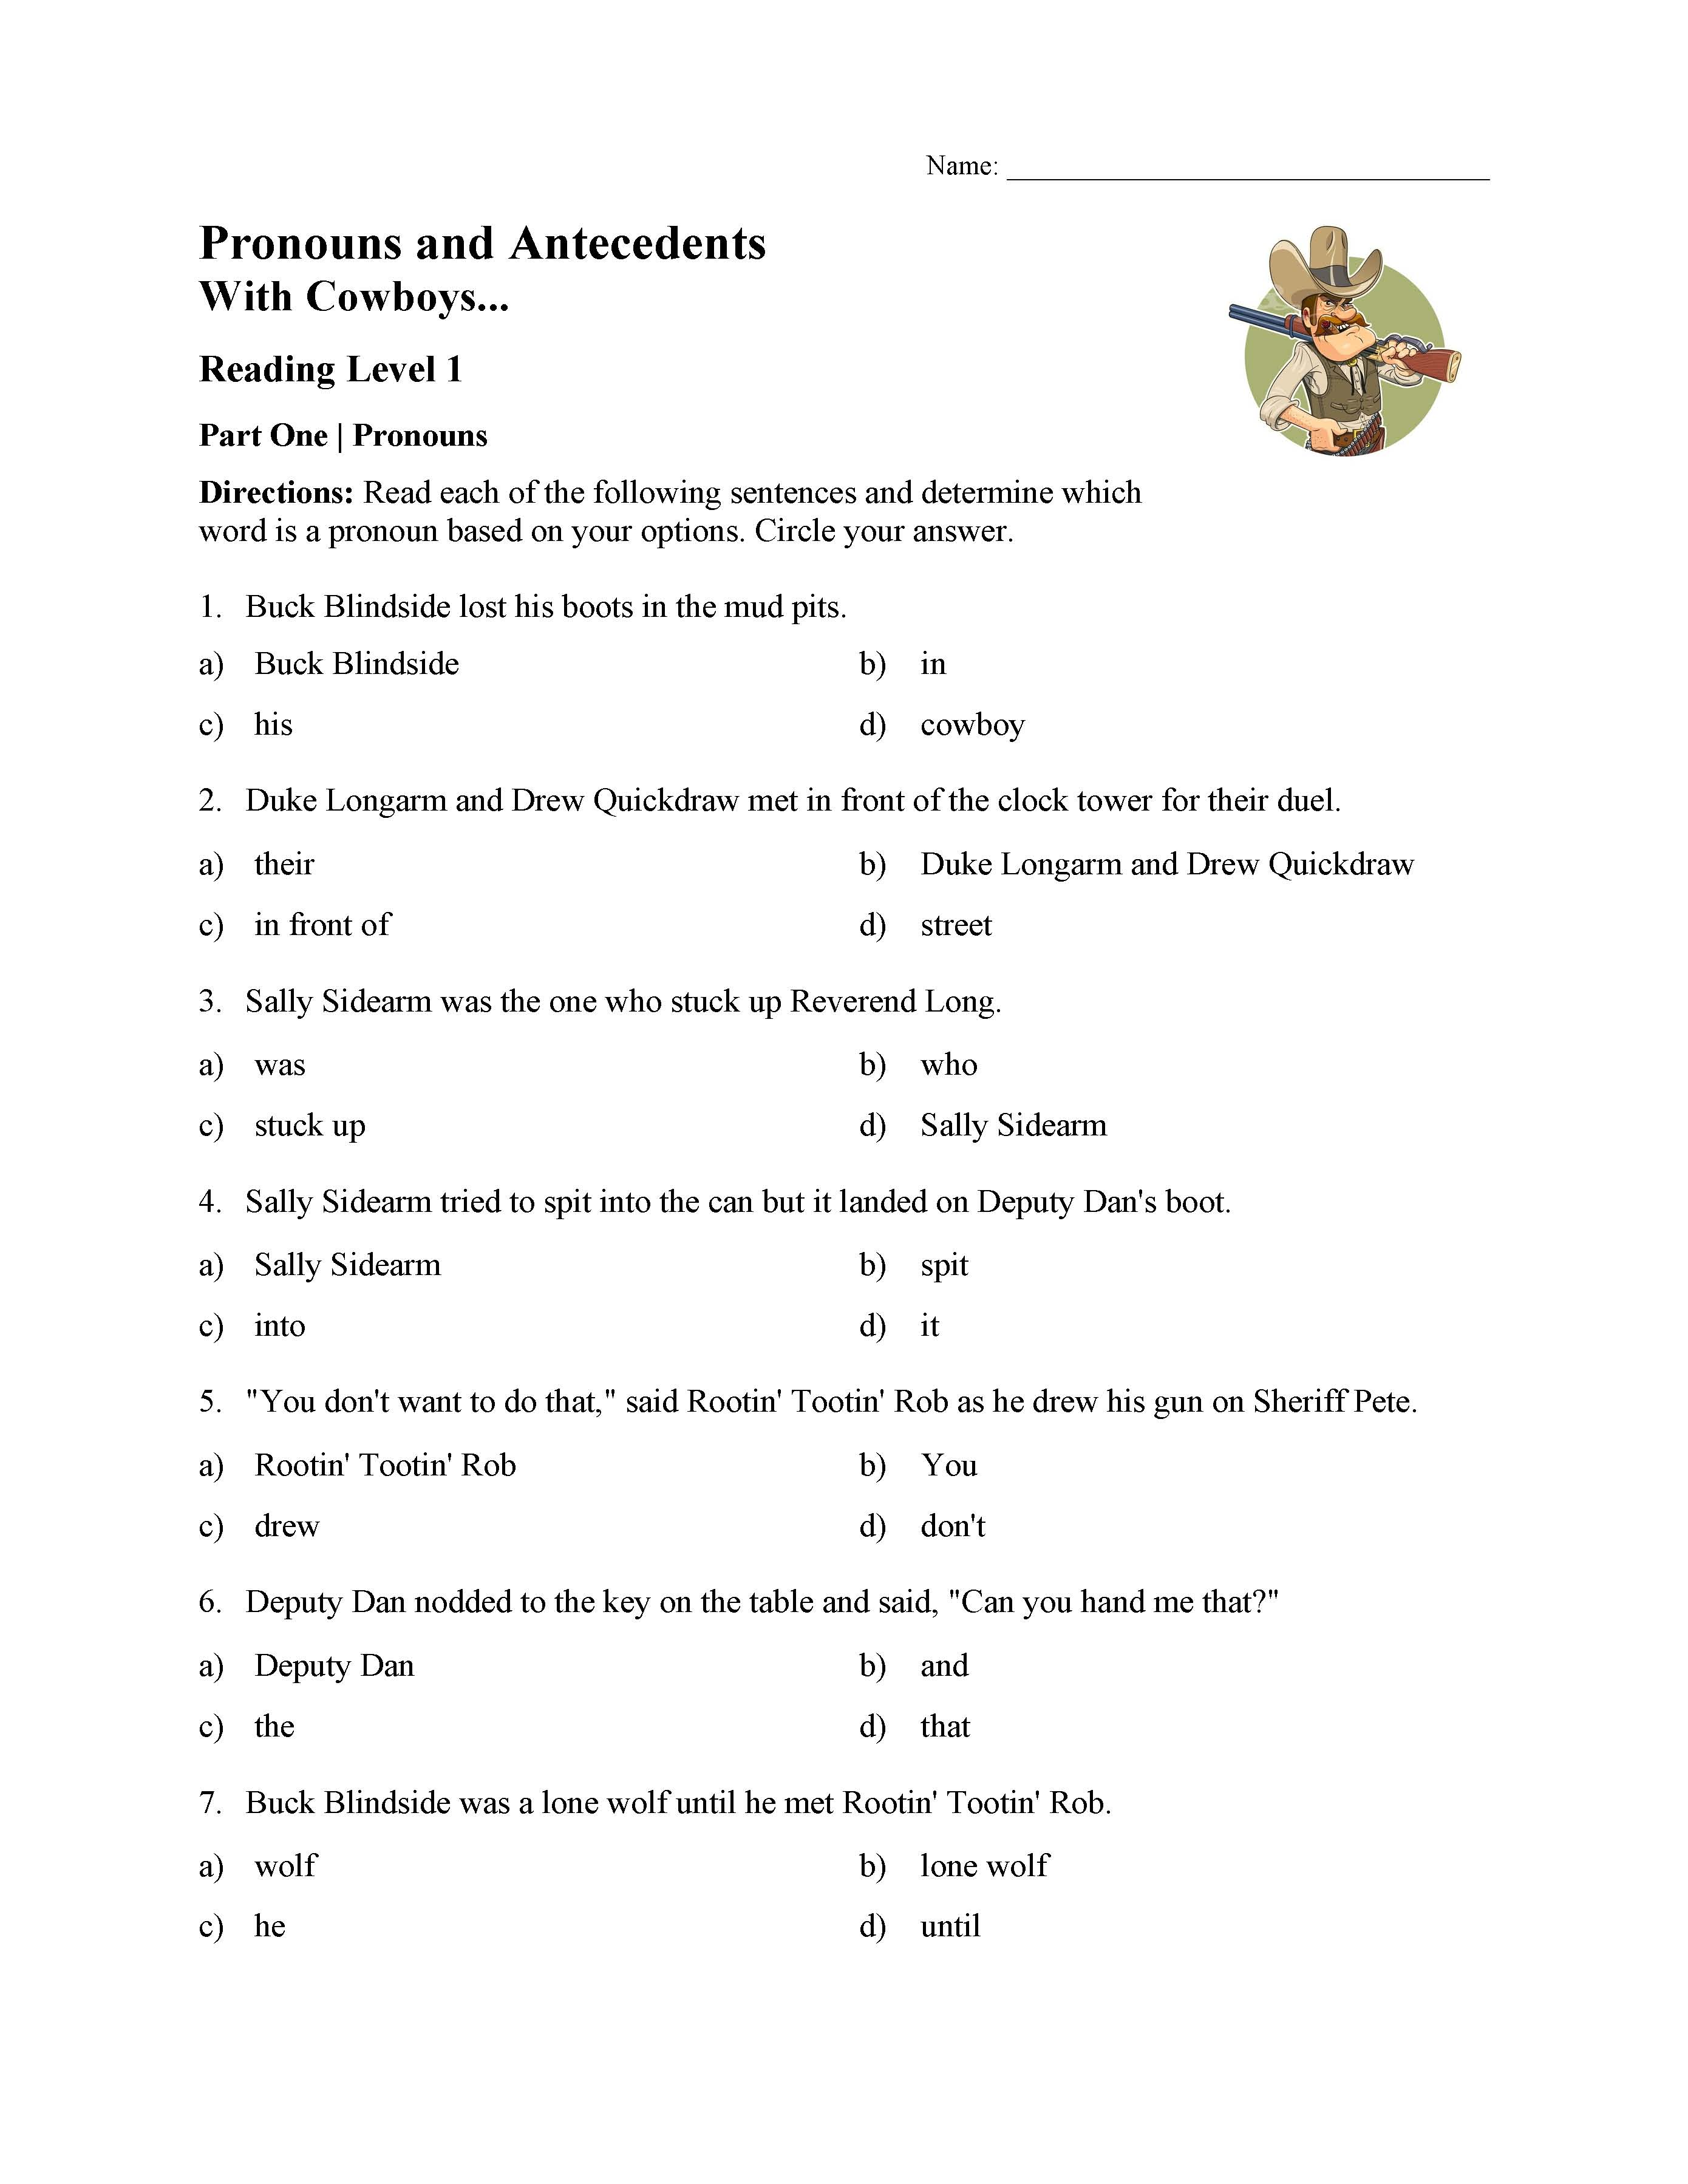 Pronoun and Antecedent Test - With Cowboys  Reading Level 11  Preview Regarding Pronouns And Antecedents Worksheet